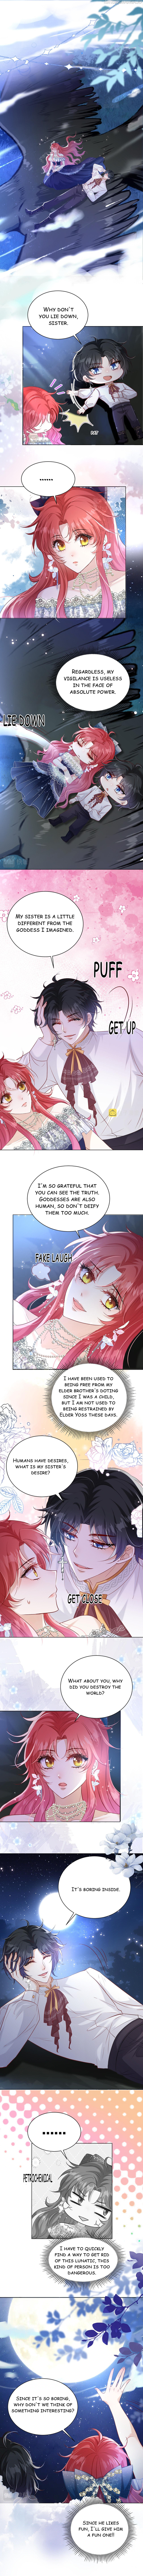 Did The Goddess Survive Today? - Page 1